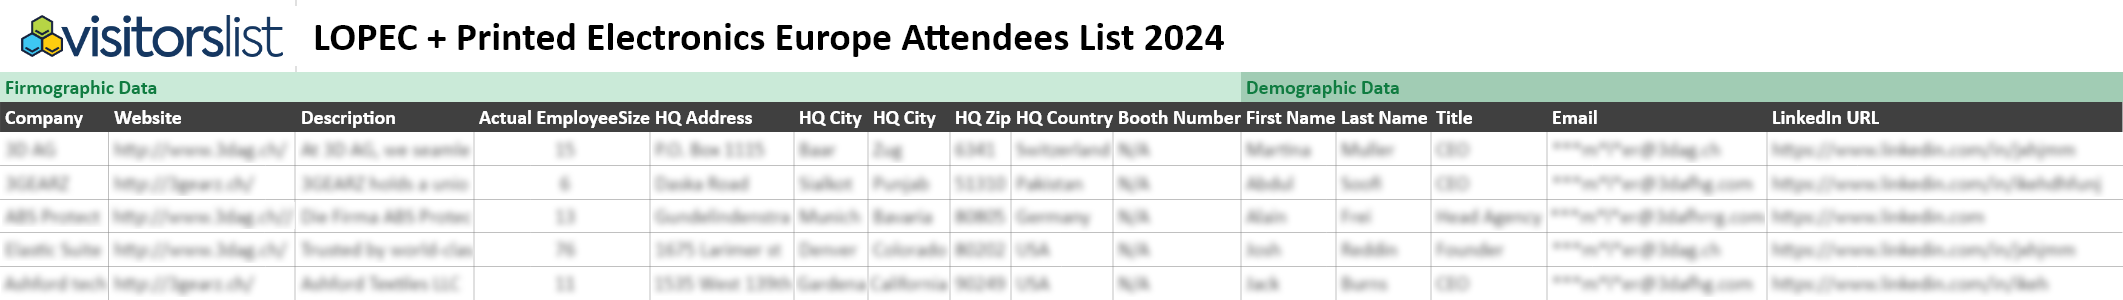 LOPEC + Printed Electronics Europe Attendees List 2024